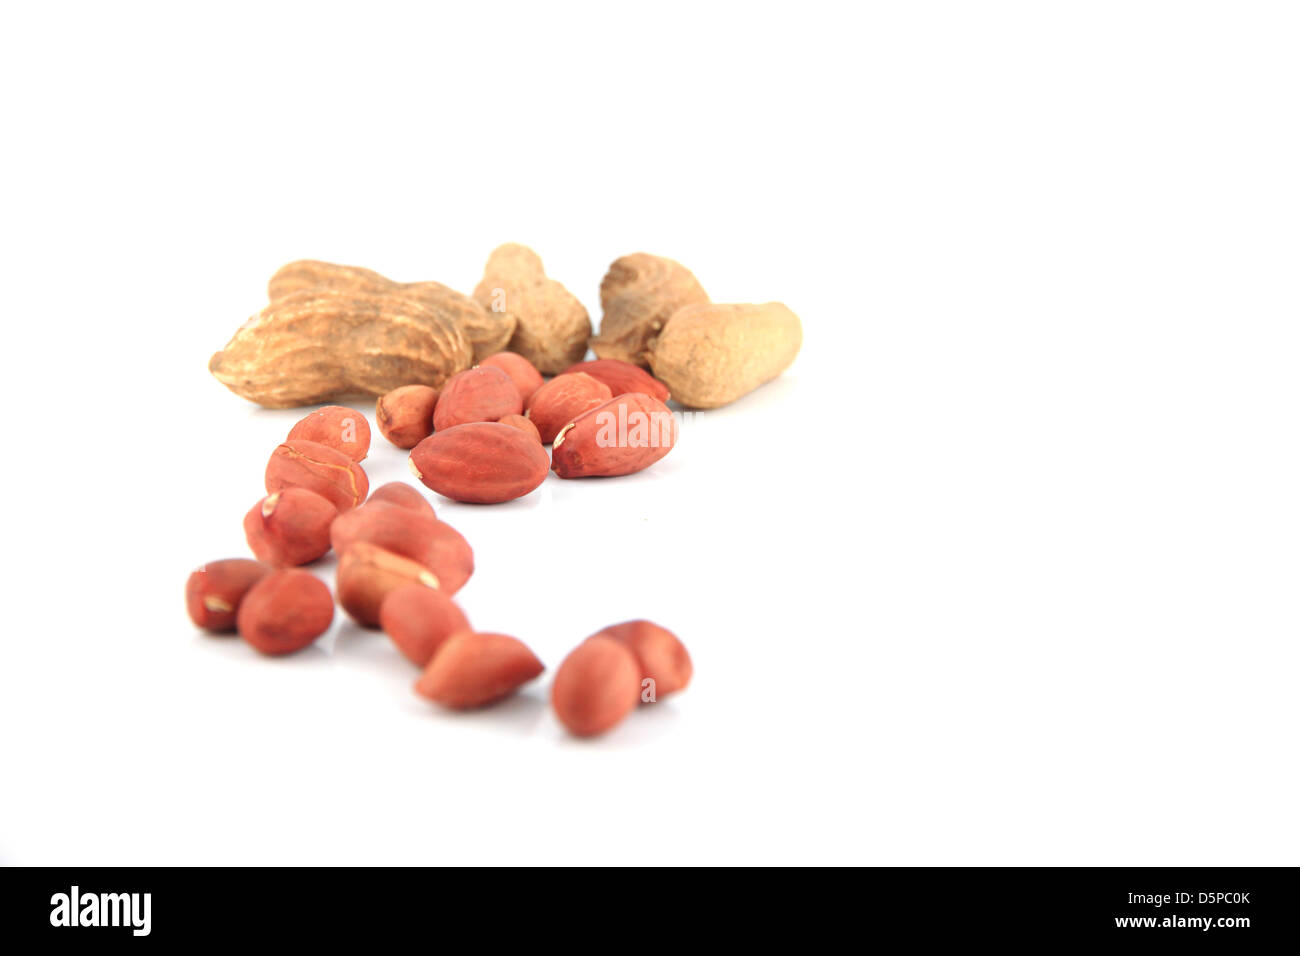 A lot of Peanuts on isolated over white background,focus on foreground Stock Photo